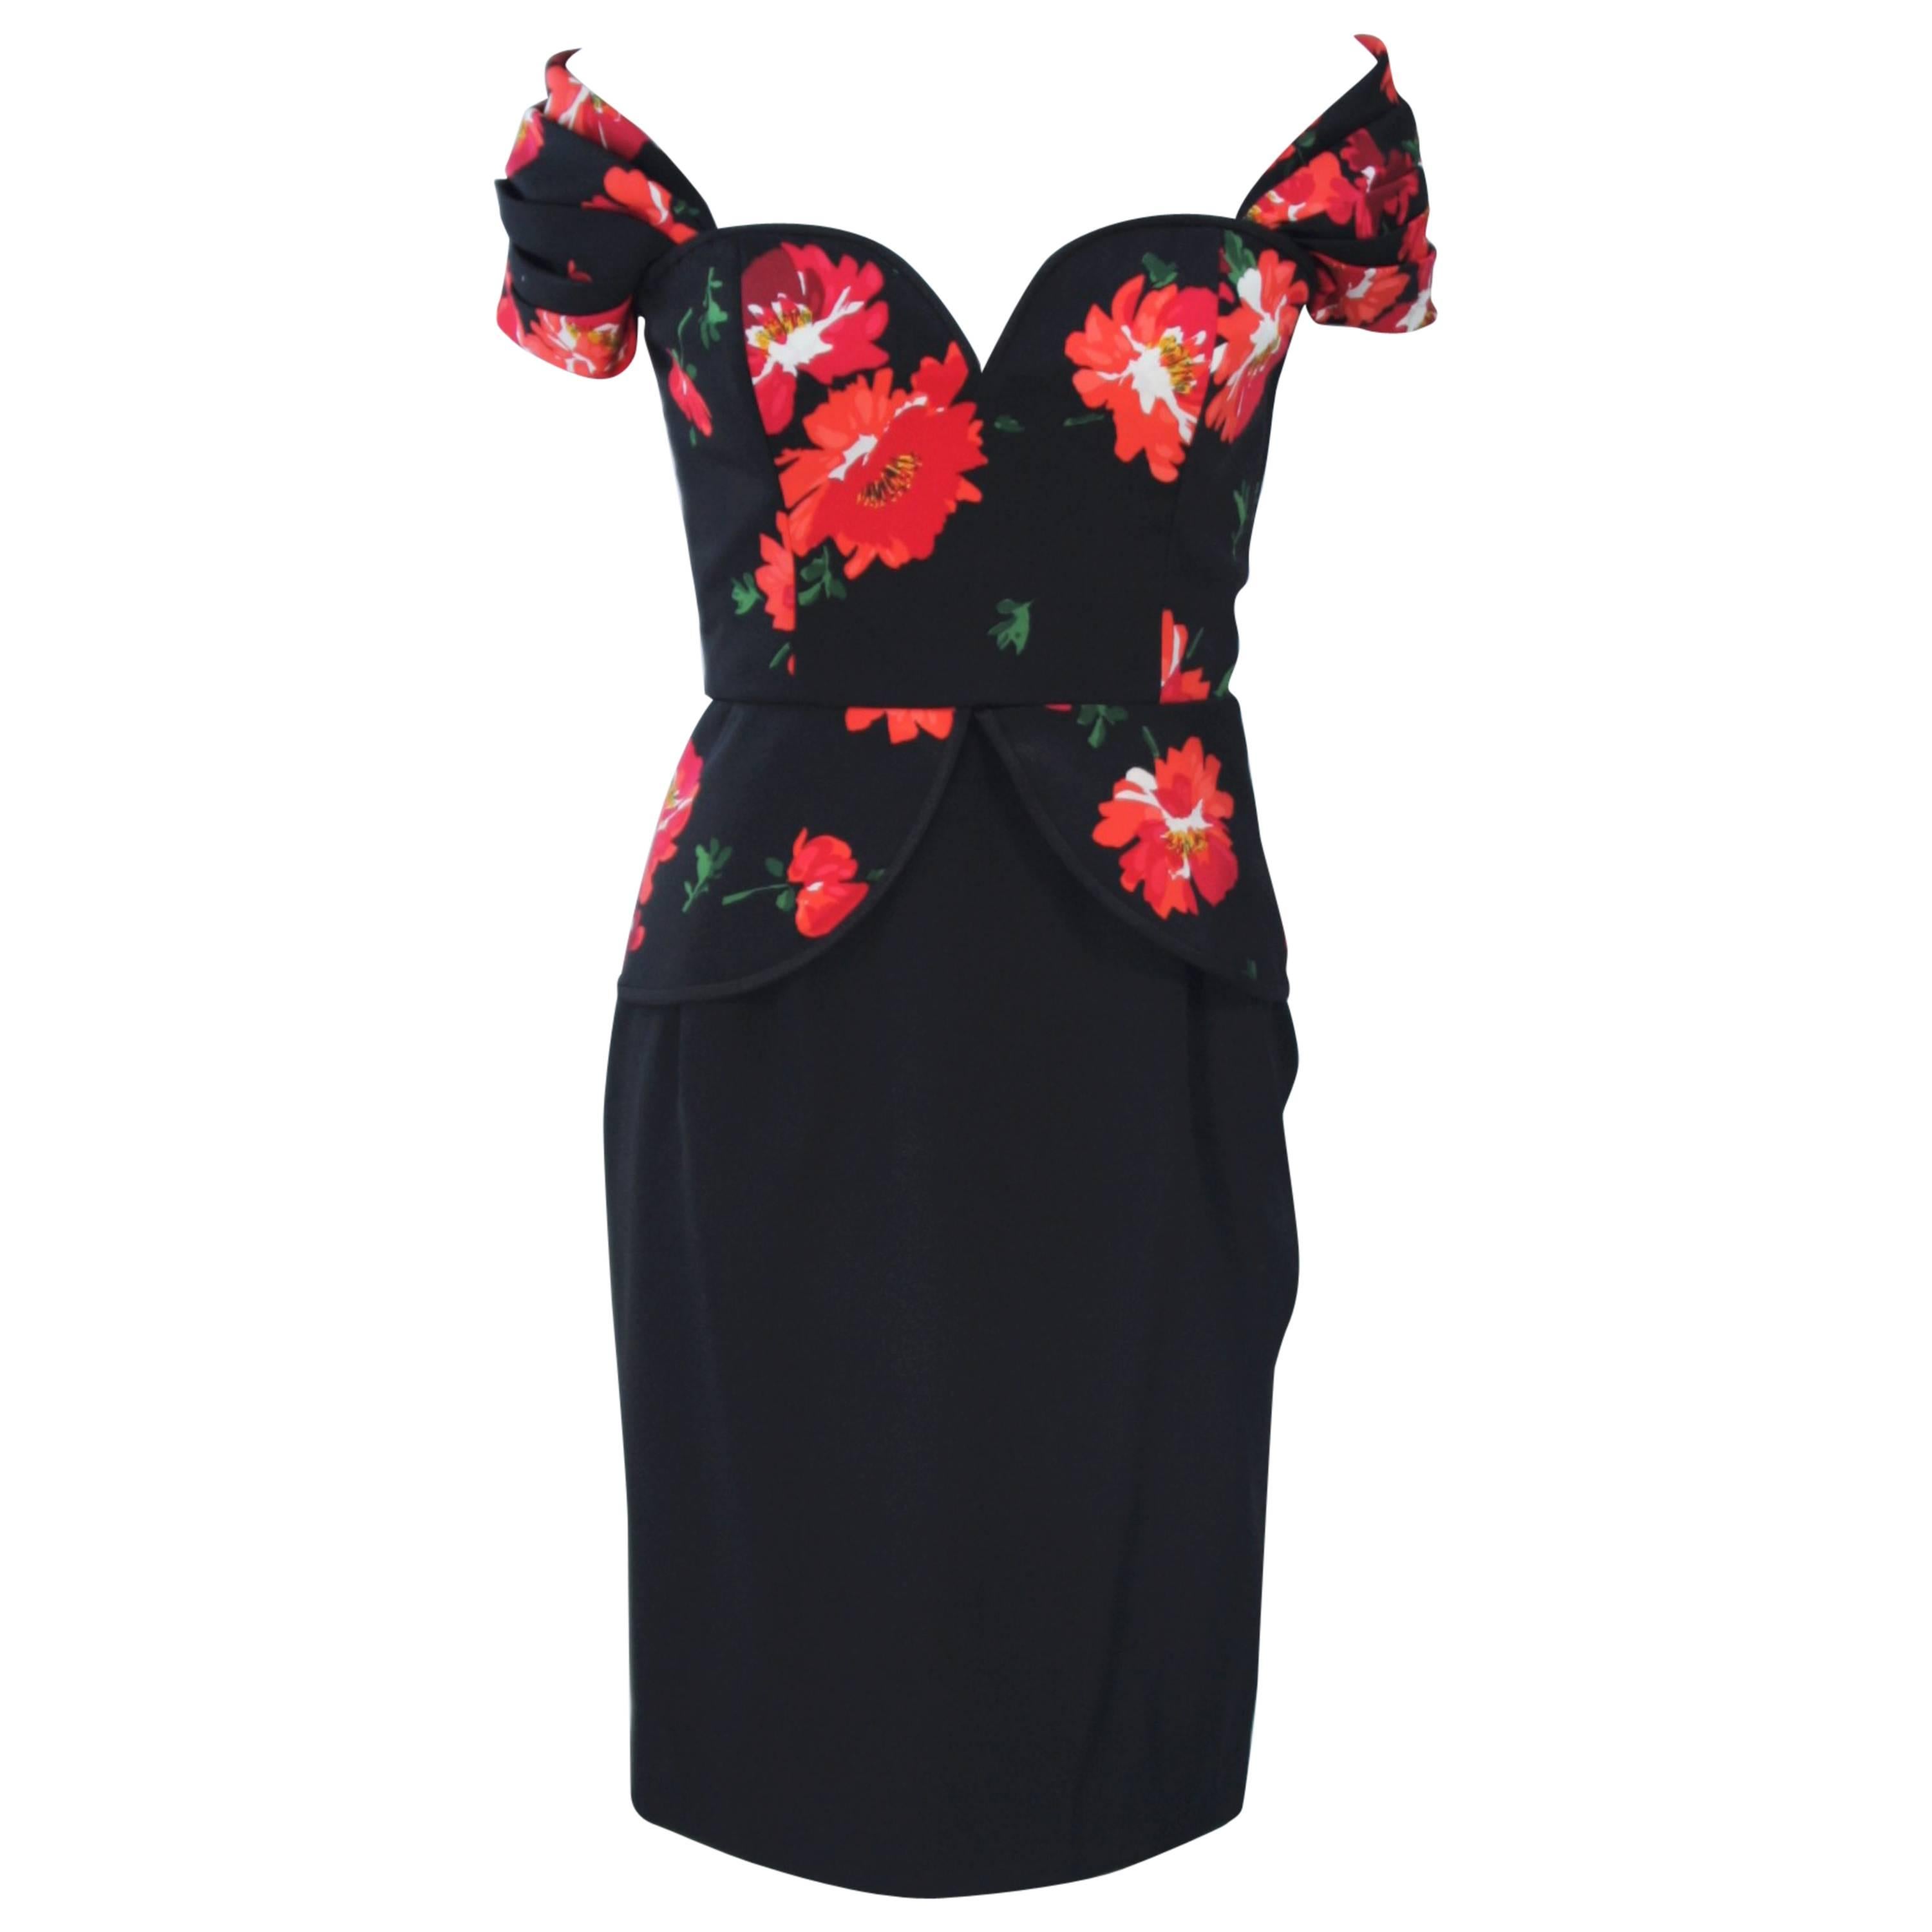 ANDREA ODICINI Black Silk Floral Print Cocktail Dress with Peplum Size 42 For Sale